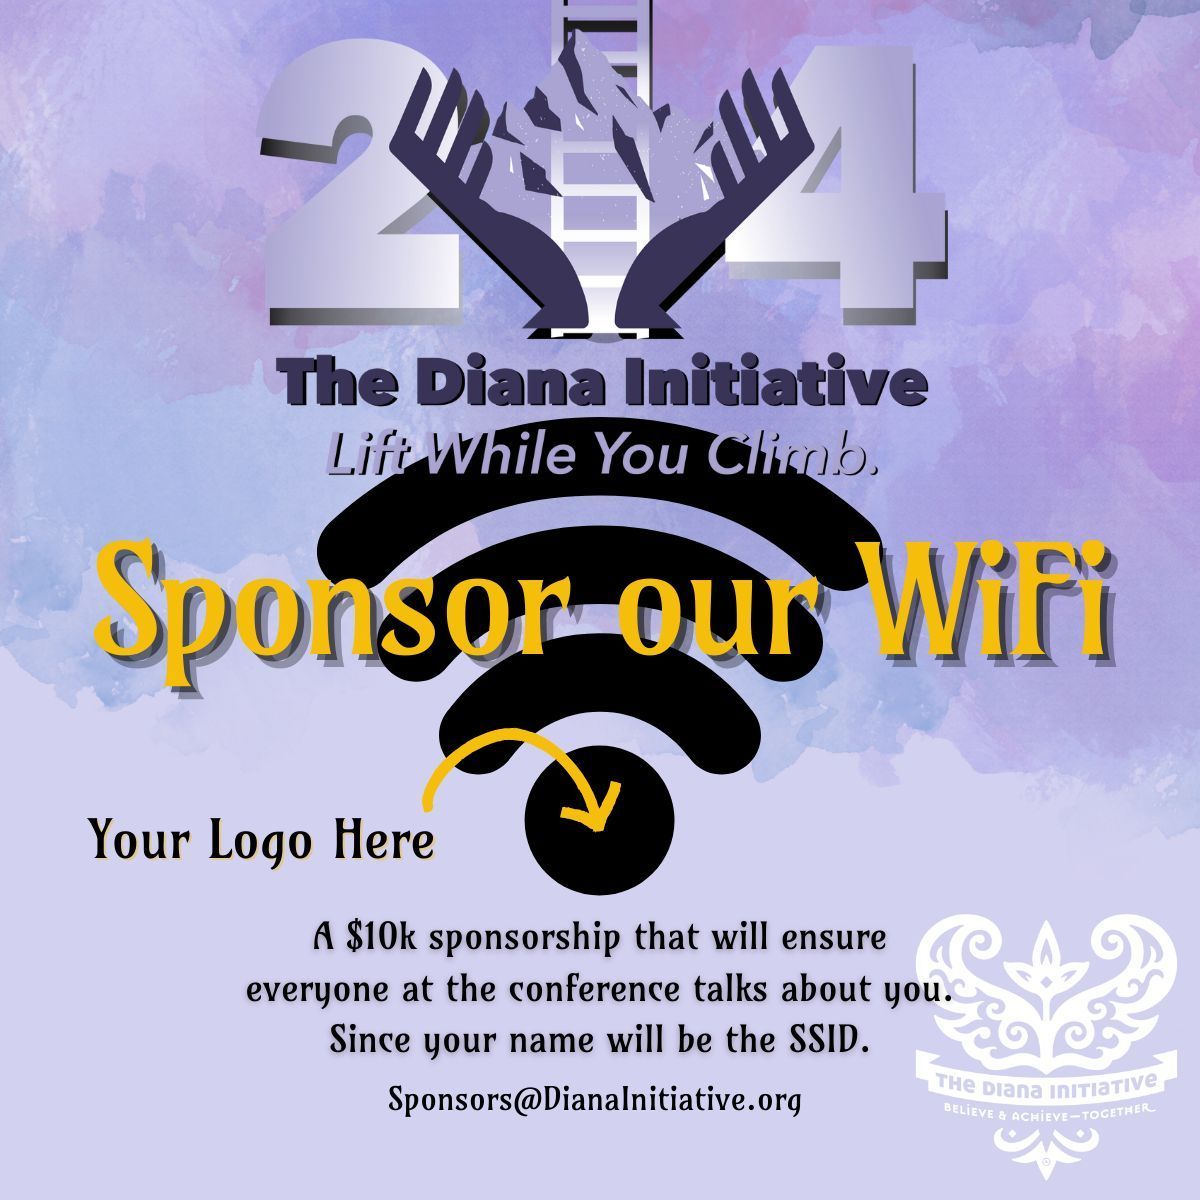 We will be saying your name ALL DAY if you sponsor our WiFi! buff.ly/3ia5uX9 #TDI2024 #LiftWhileYouClimb